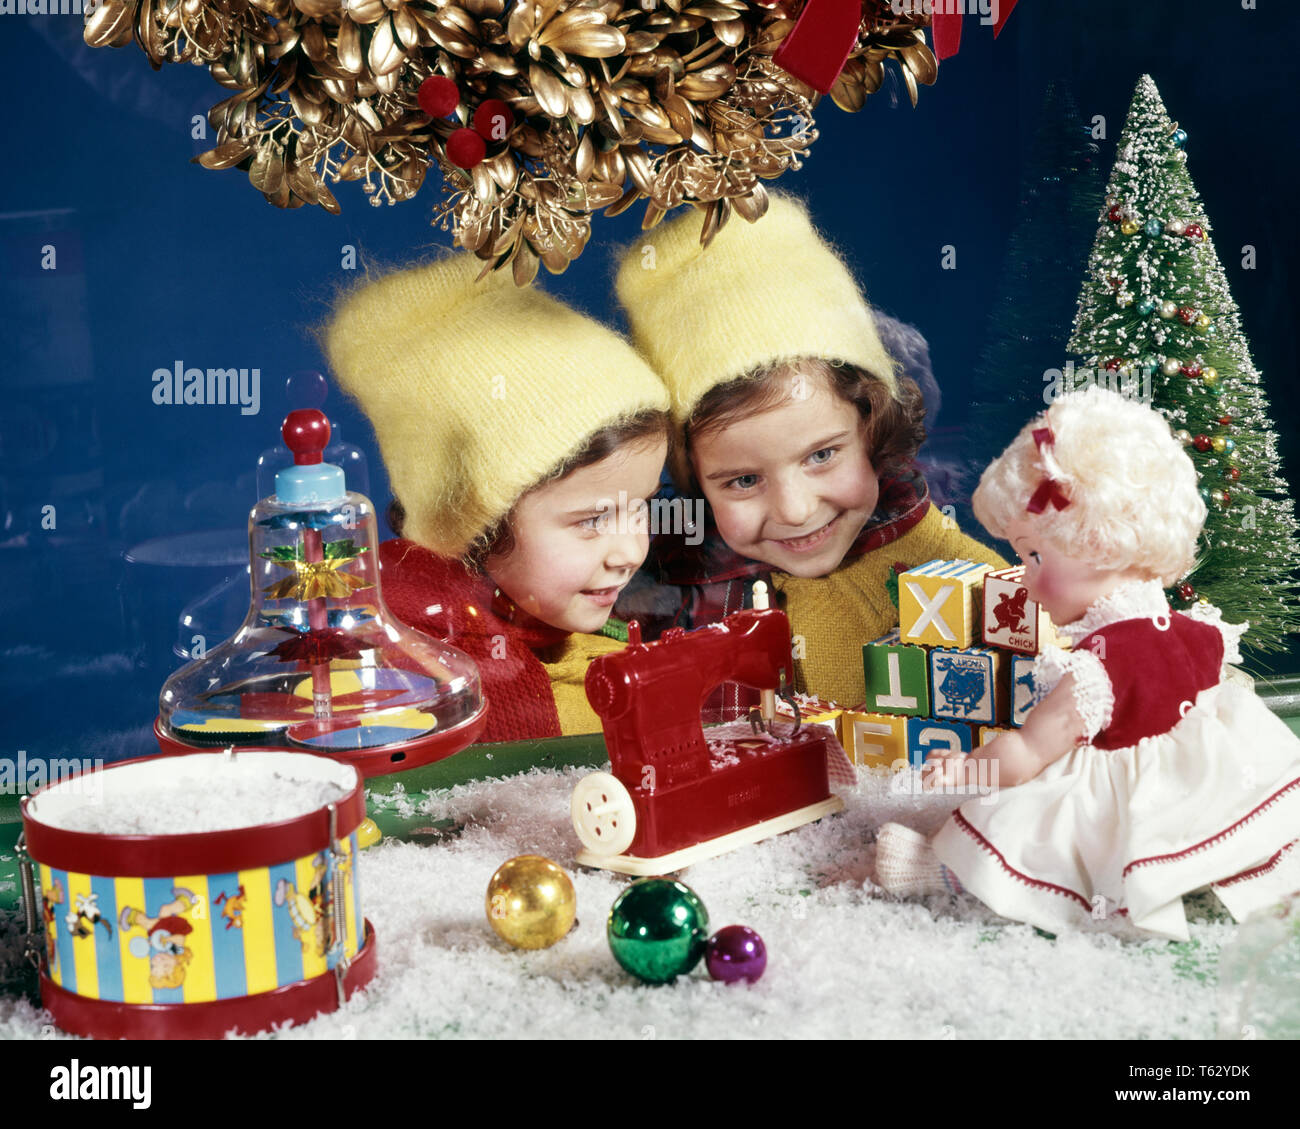 1960s TWO SMILING GIRLS TWIN SISTERS LOOKING IN CHRISTMAS TOY STORE WINDOW AT DOLL AND SEWING MACHINE  - kx5755 HAR001 HARS TWIN IDENTICAL DOUBLE PLEASED JOY LIFESTYLE CELEBRATION FEMALES INSPIRATION MATCH SIBLINGS SISTERS MATCHING SAME DREAMS HAPPINESS HEAD AND SHOULDERS CHEERFUL DISCOVERY STRATEGY CUSTOMER SERVICE MERRY AND CHOICE EXCITEMENT EXTERIOR AT IN ANTICIPATION SIBLING SMILES DECEMBER CONCEPTUAL DECEMBER 25 IMAGINATION JOYFUL SEWING MACHINE STYLISH LOOK-ALIKE DUPLICATE JOYOUS JUVENILES LOOK ALIKE TOGETHERNESS CLONE HAR001 OLD FASHIONED Stock Photo